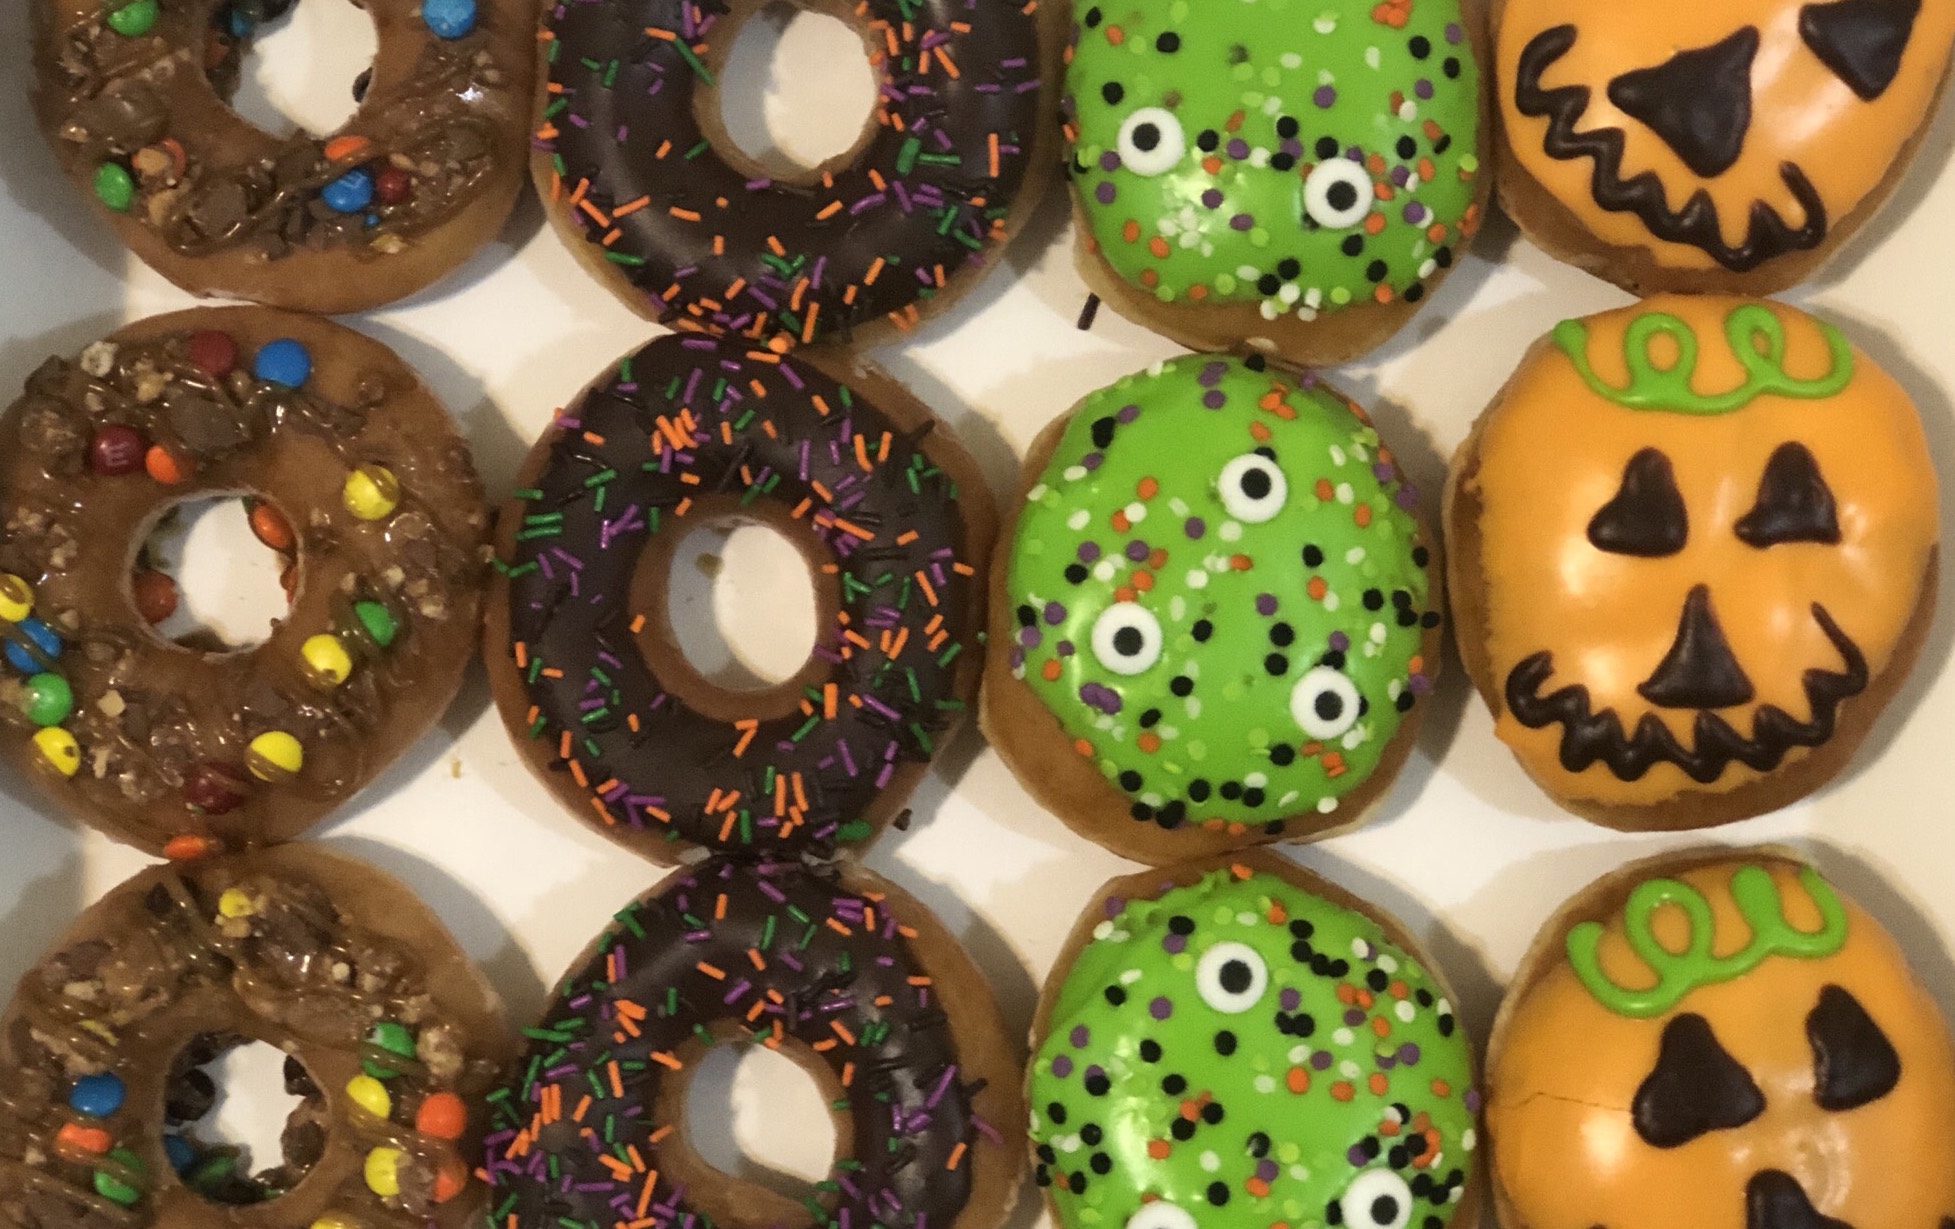 I Tried All Of Krispy Kreme's New Halloween Doughnuts And They're A